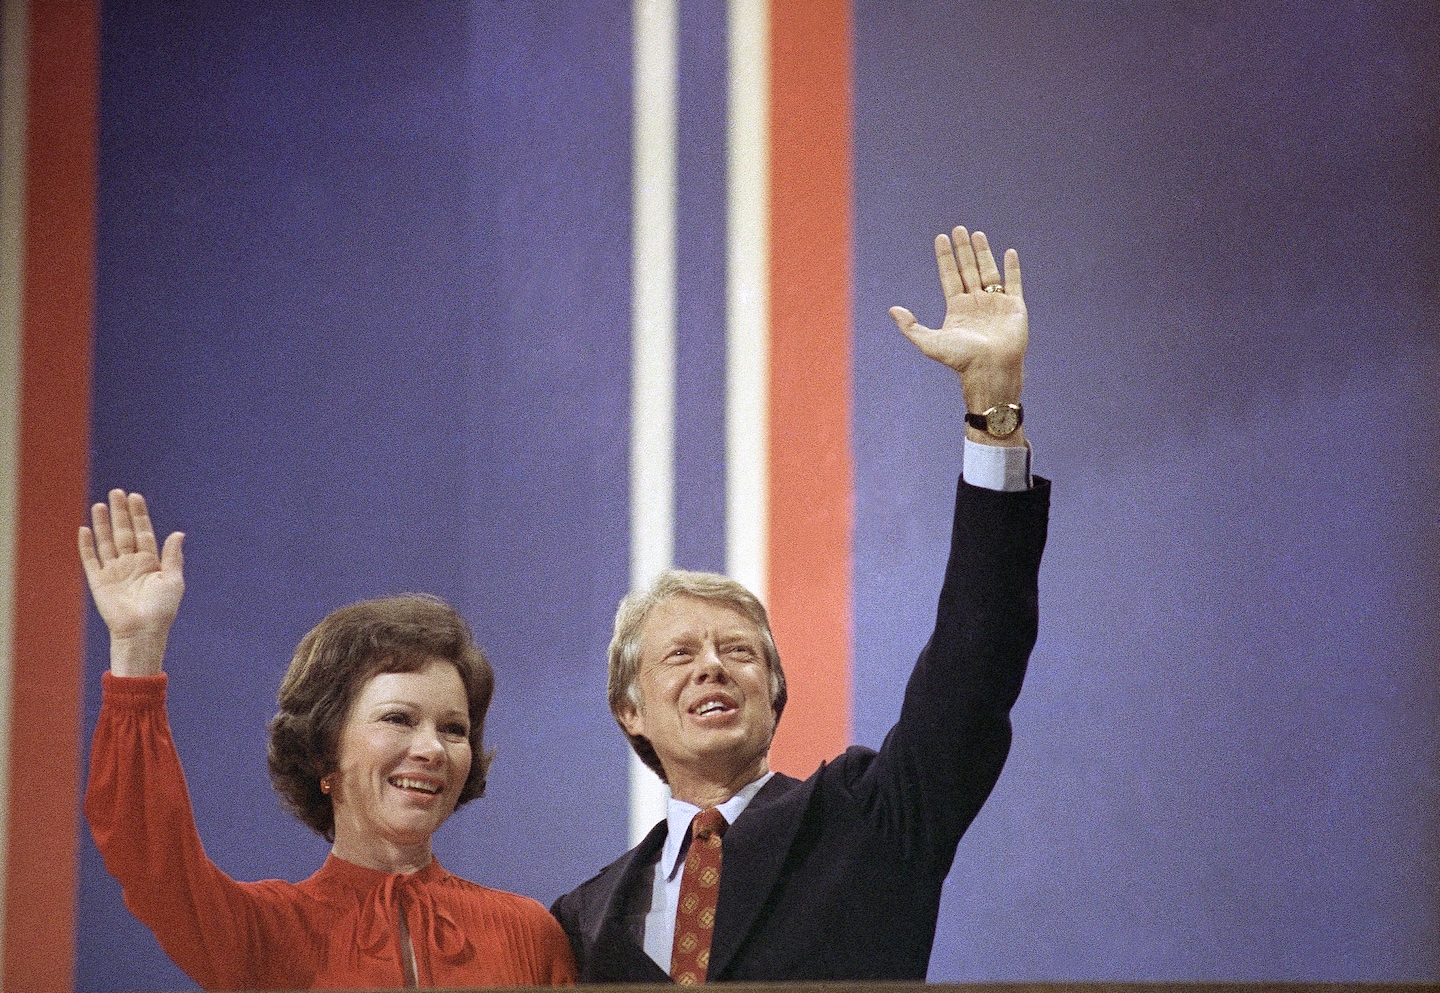 Rosalynn Carter, first lady who championed mental health, dies at 96